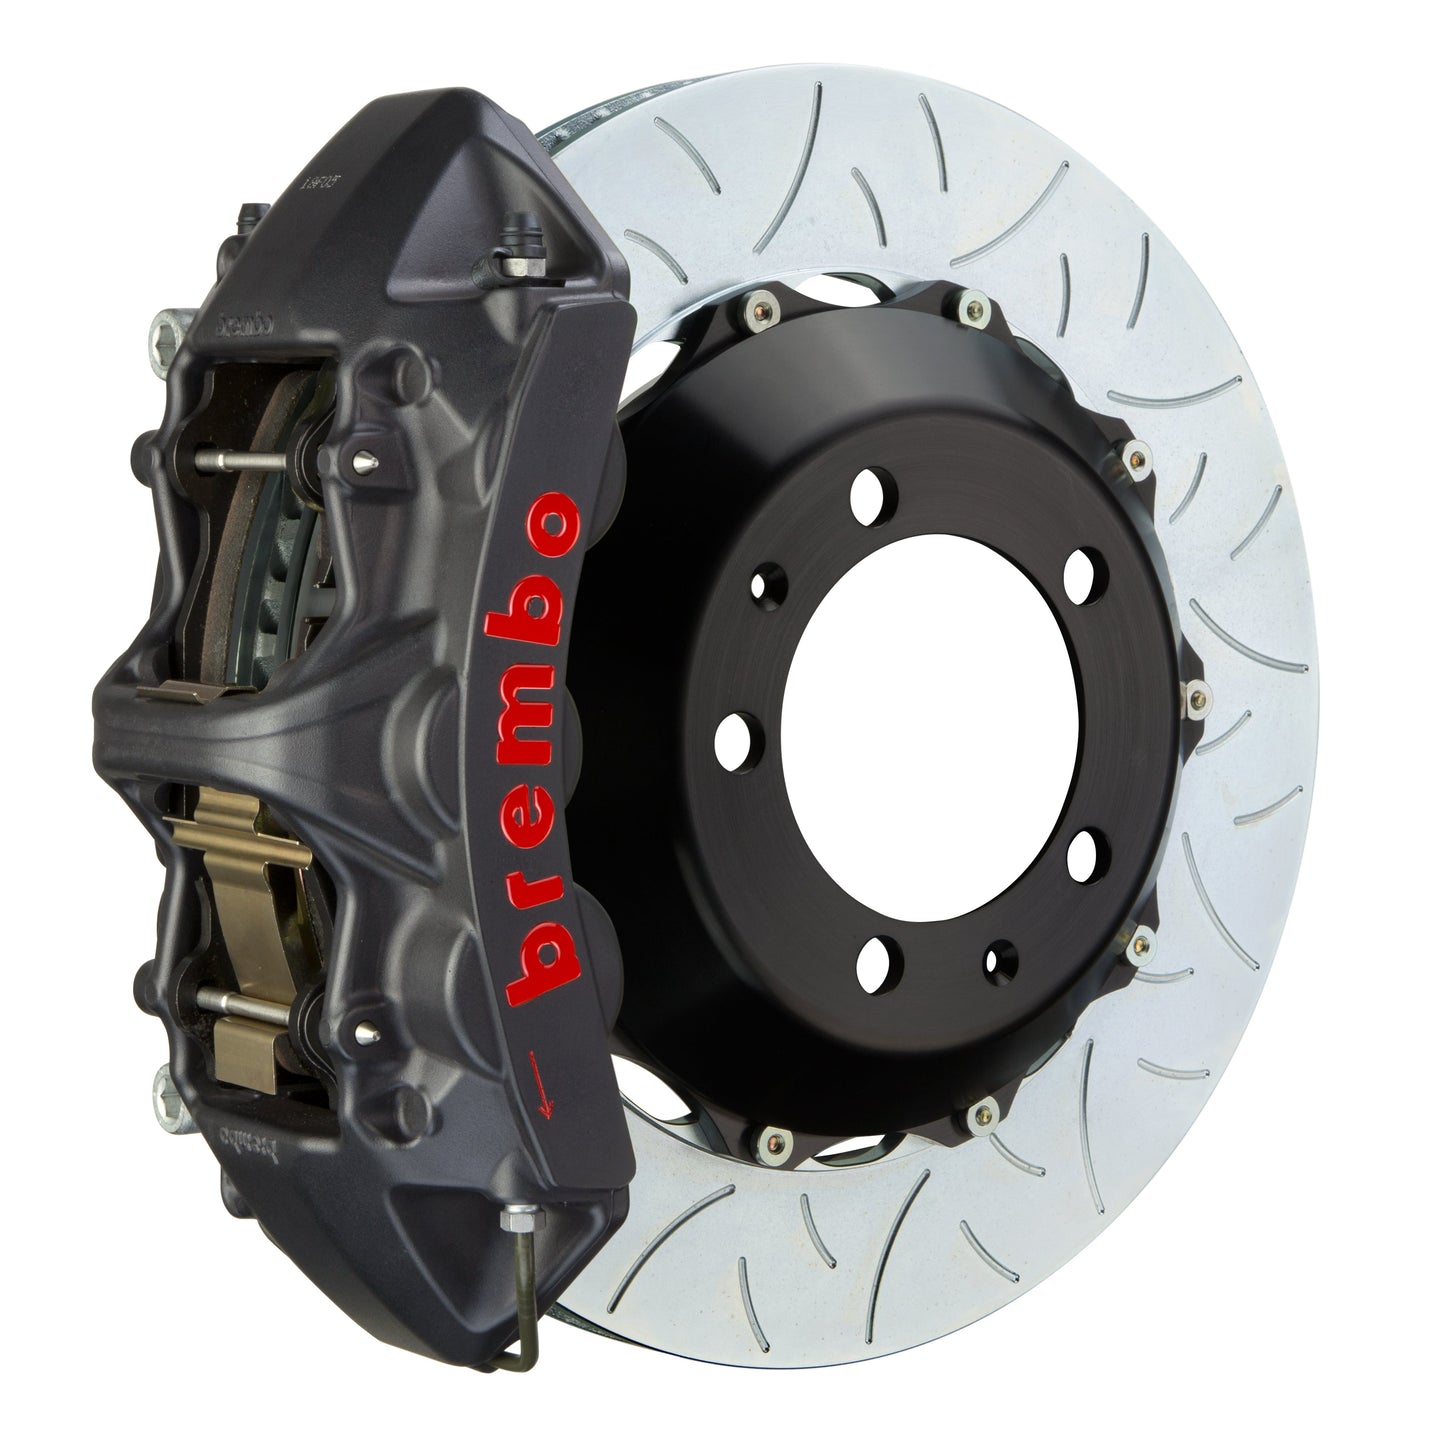 Front Brembo Gran Turismo Braking Upgrade Kit (1M19003AS) GT / S6 Caliper with 6-Pistons & 2-piece 380x32 Disc